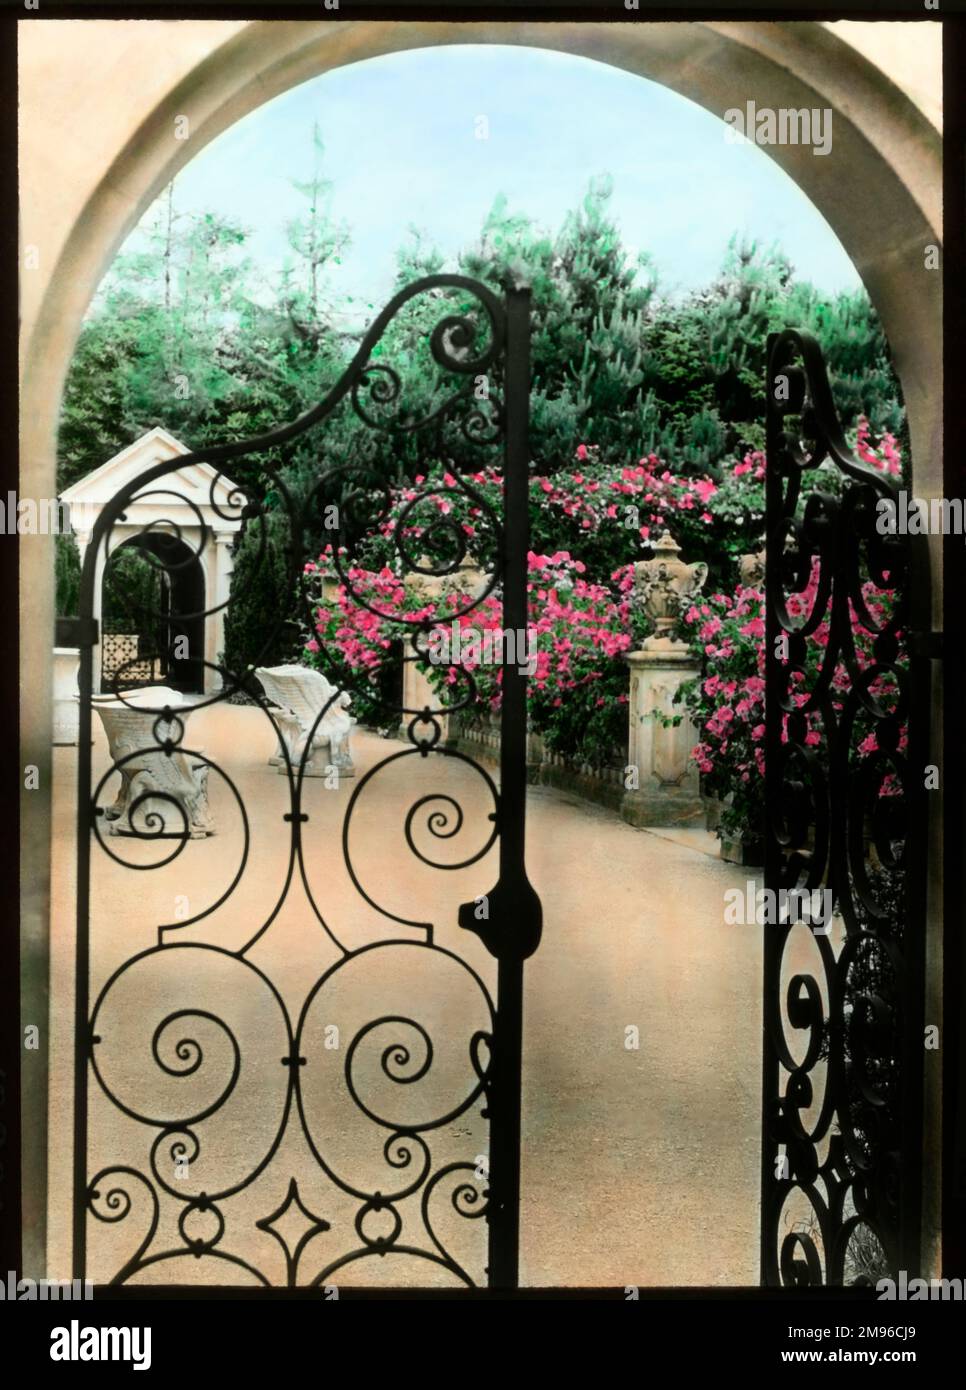 View of Compton Acres Gardens in the village of Canford Cliffs, near Poole, Dorset.  Bright pink flowers can be seen through an archway with a wrought iron gate. Stock Photo